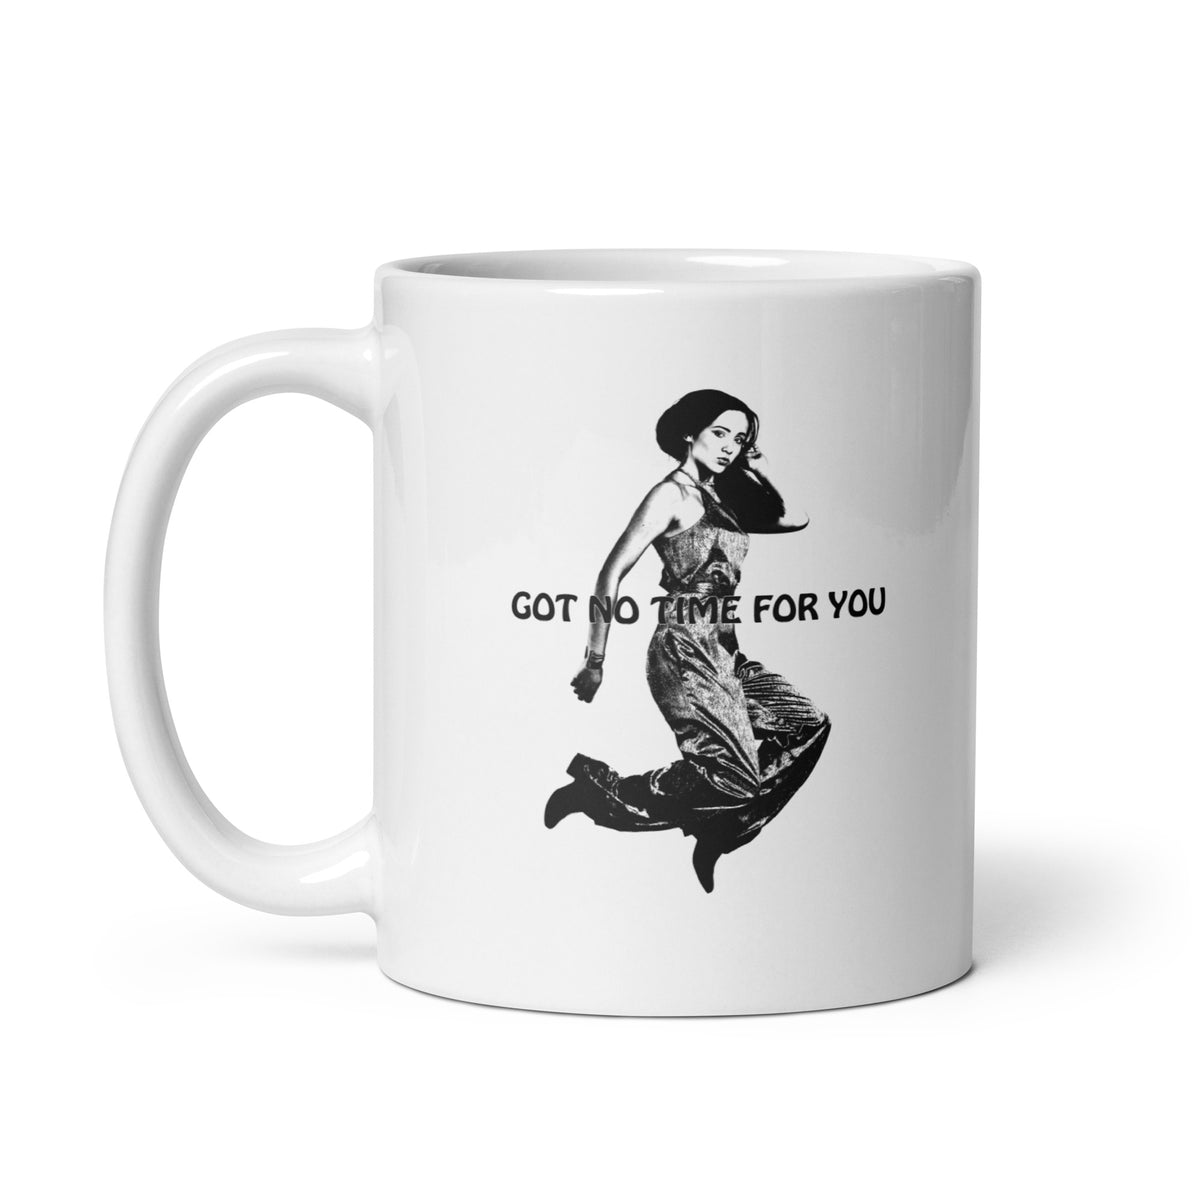 Coffee mug with a young woman jumping in the air with the words Got NO Time For You- both the woman and words are black